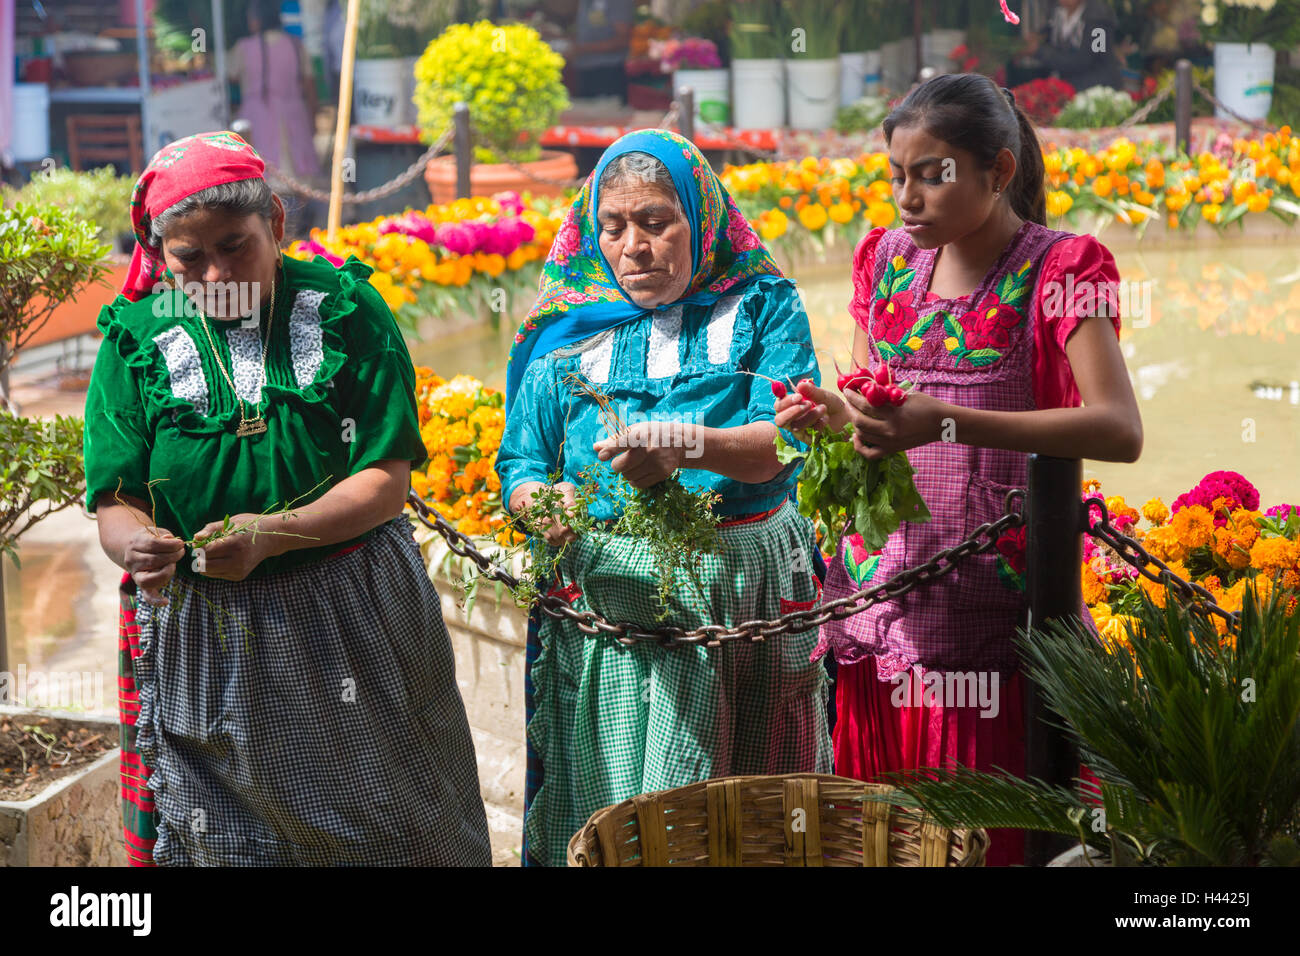 Zapotec women selling fresh cut flowers at the Sunday market in Tlacolula de Matamoros, Mexico. The regional street market draws thousands of sellers and shoppers from throughout the Valles Centrales de Oaxaca. Stock Photo